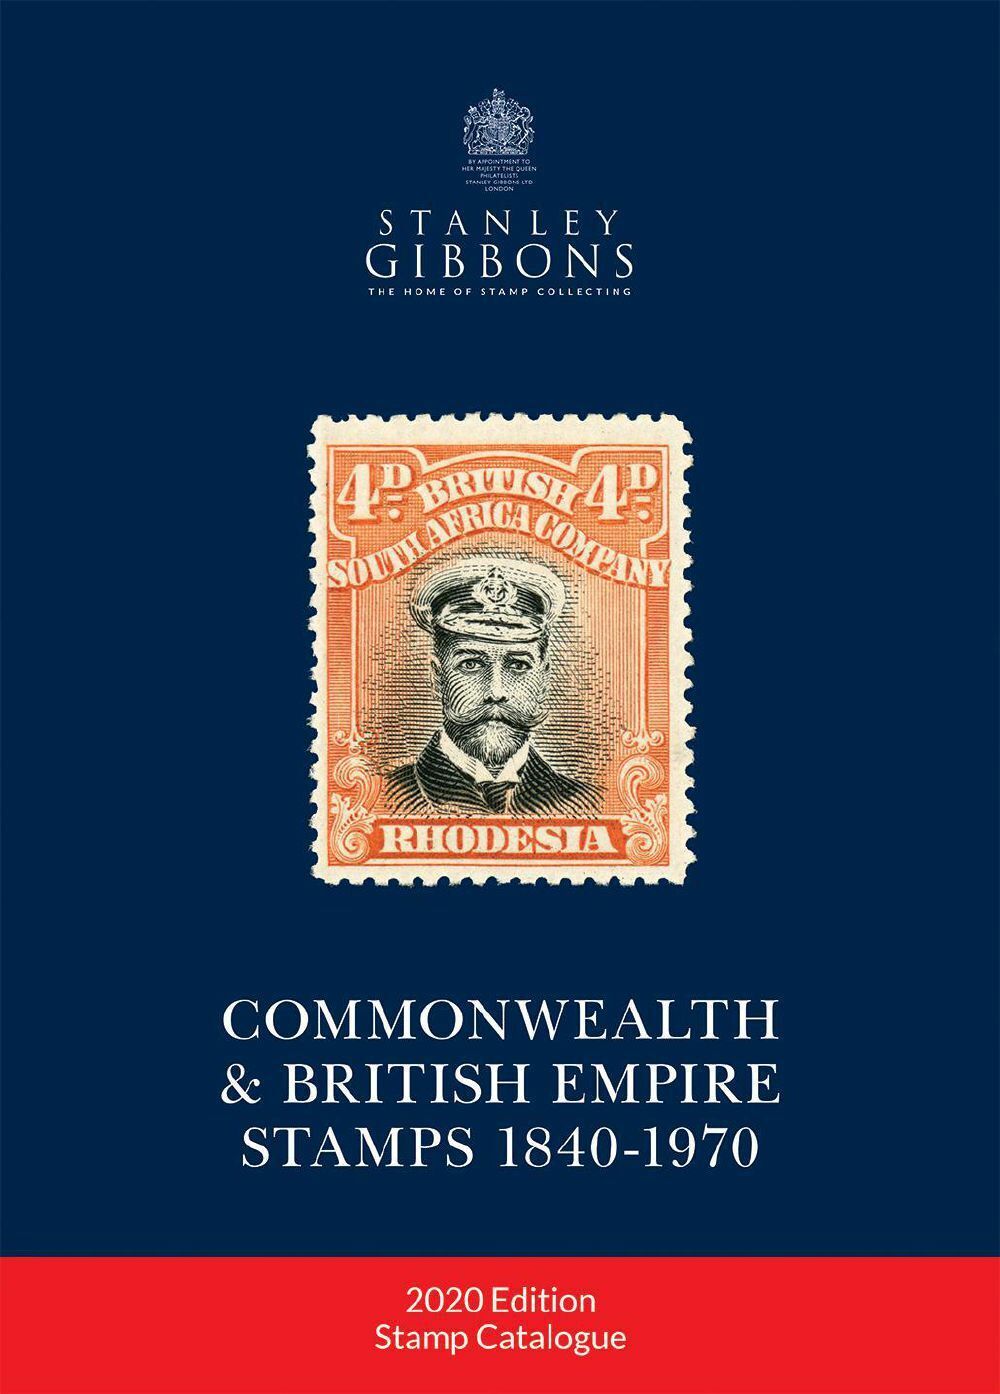 GB - 2020 Stanley Gibbons Commonwealth & British Empire Stamps Catalogue